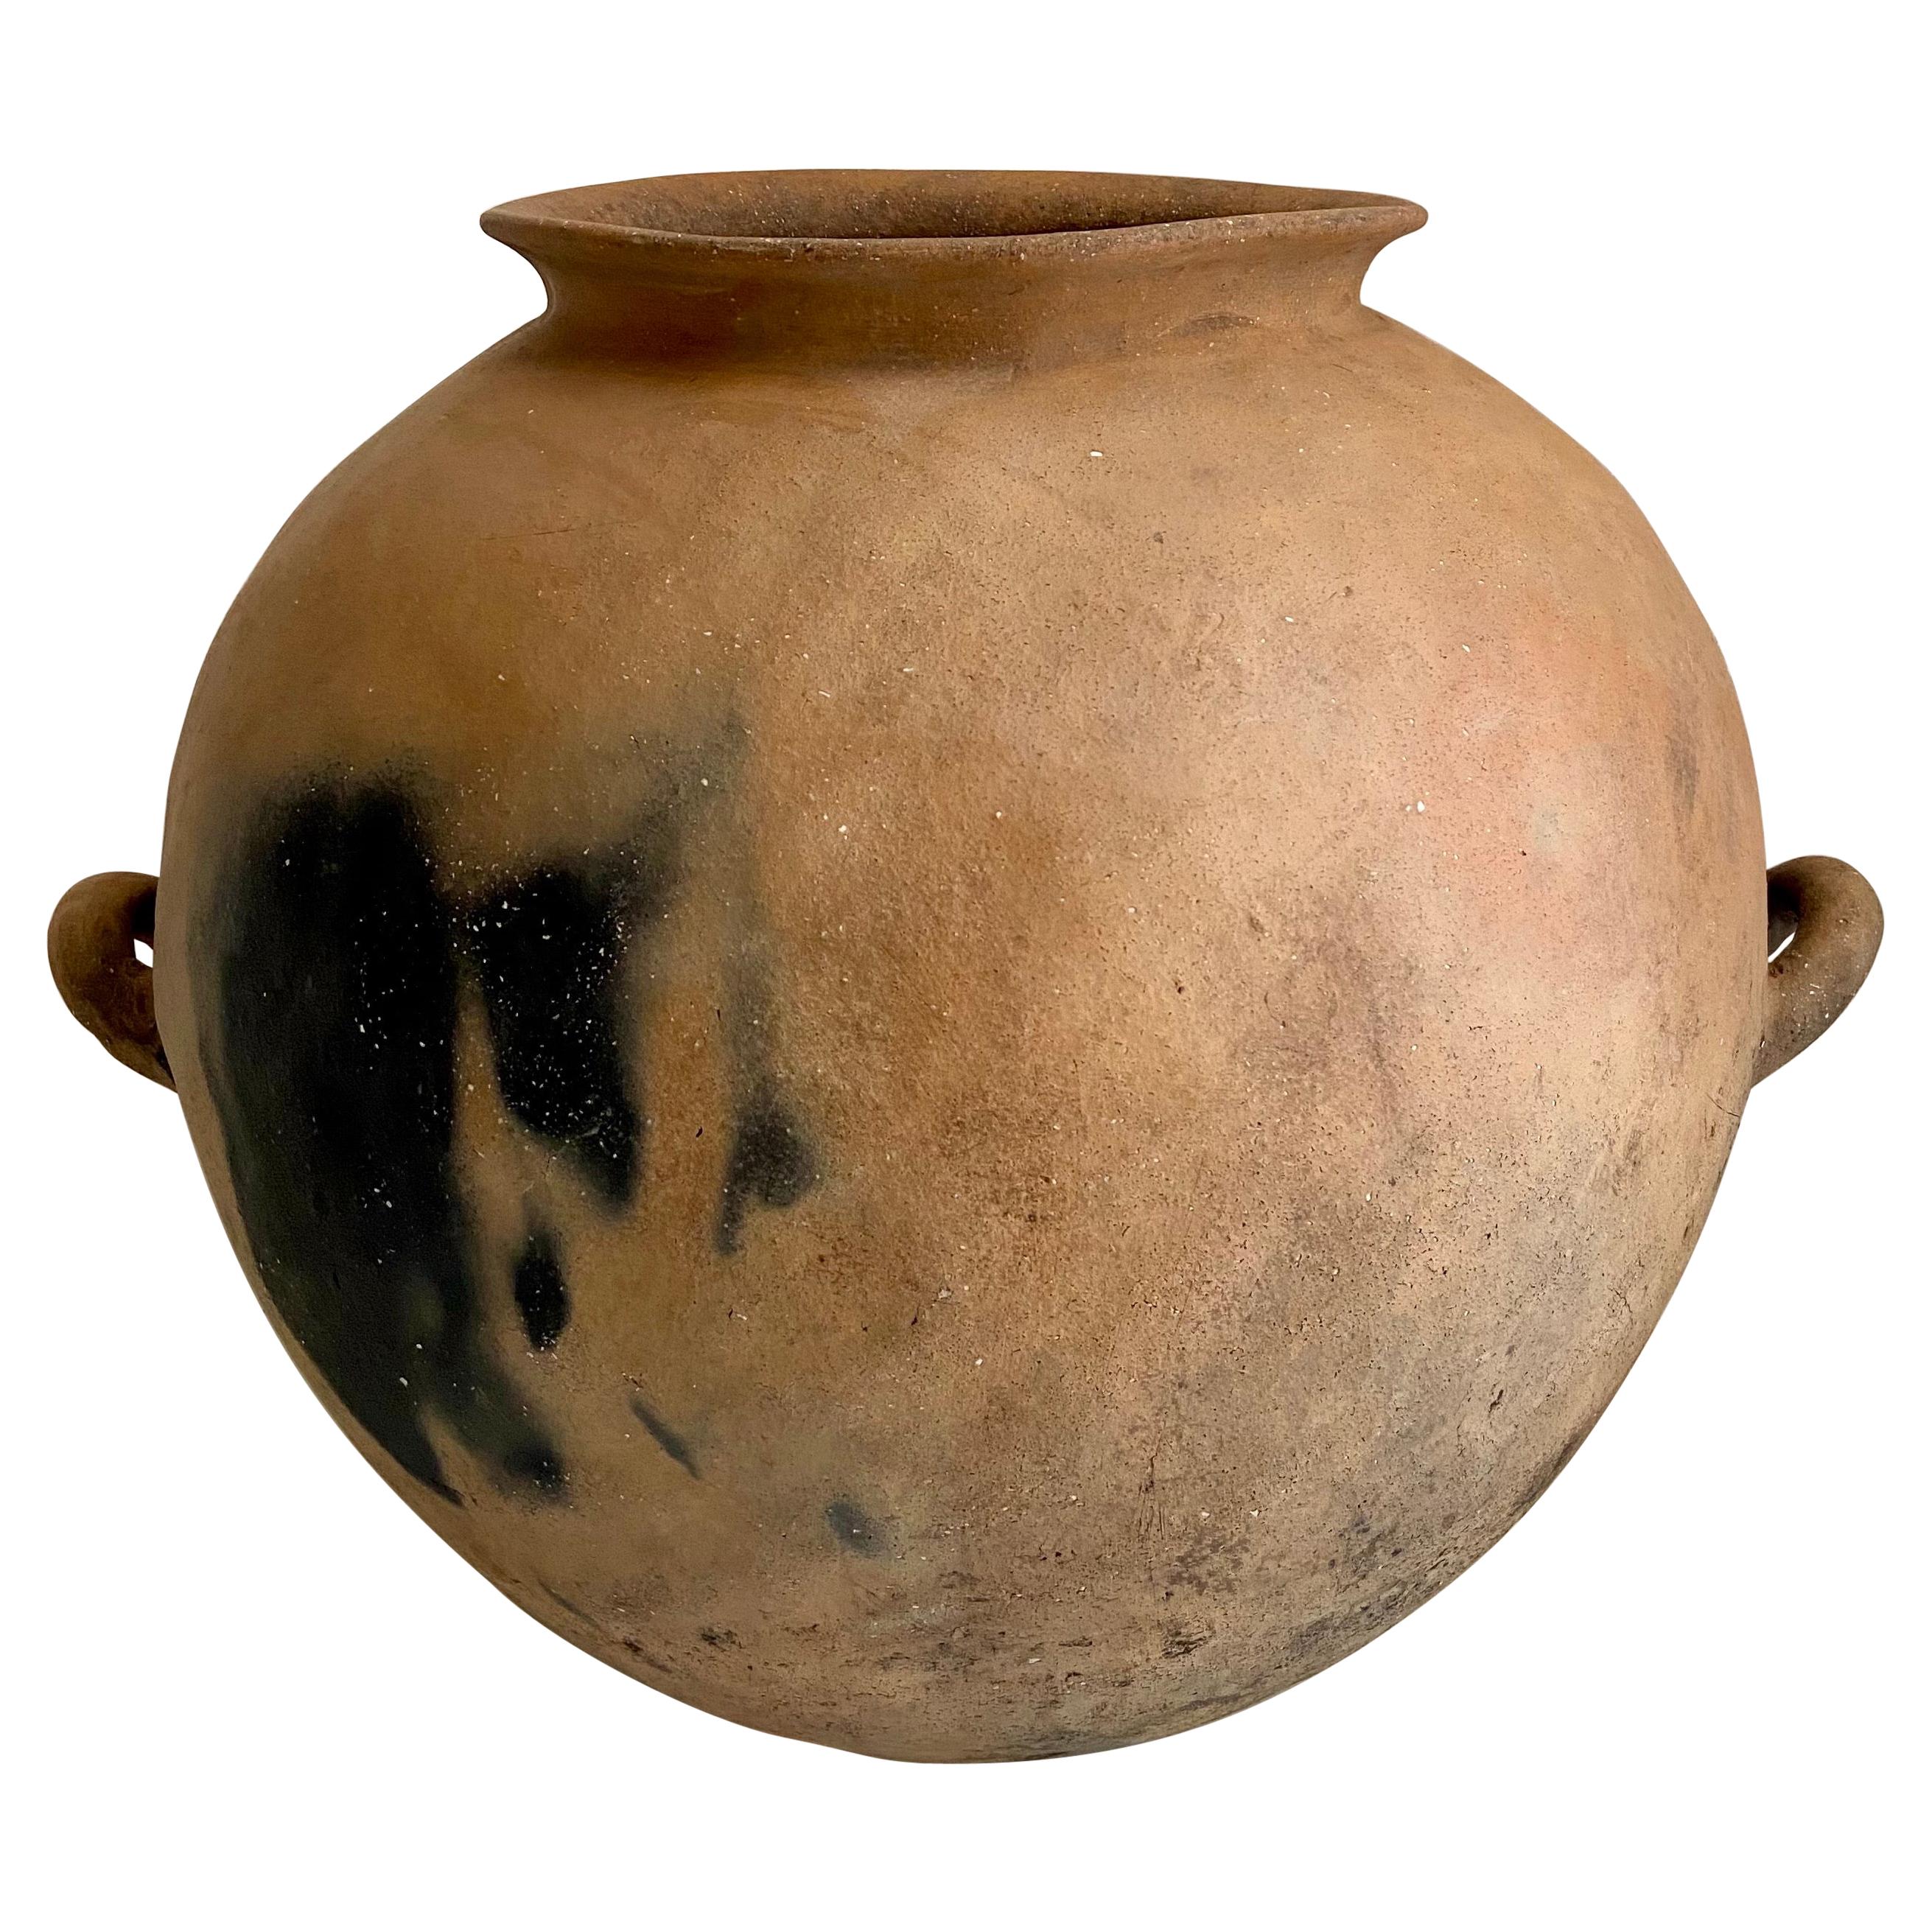 Terracotta Pot From Mexico, Early 20th Century